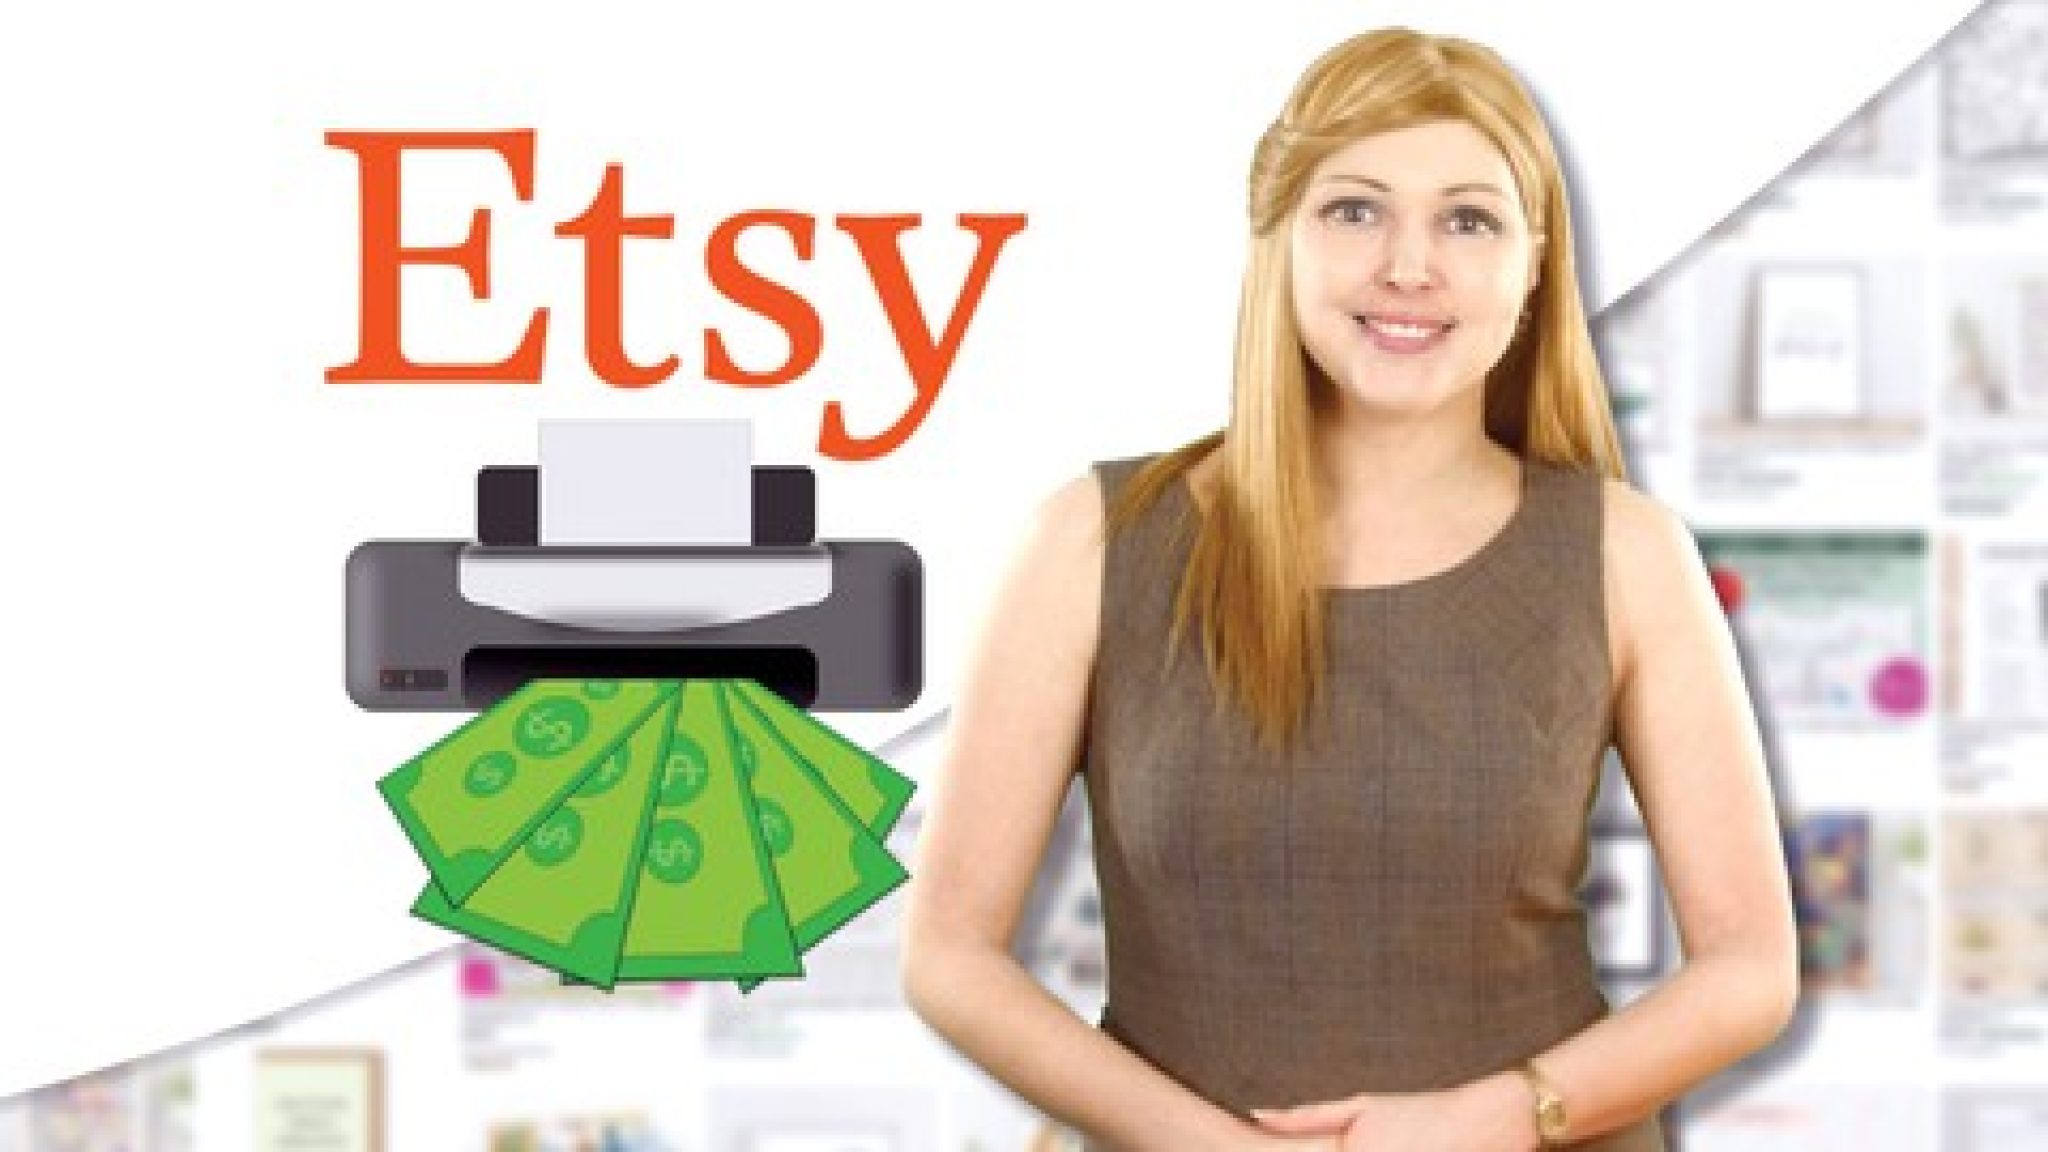 100-off-etsy-printables-business-success-step-by-step-guide-with-certificate-of-completion